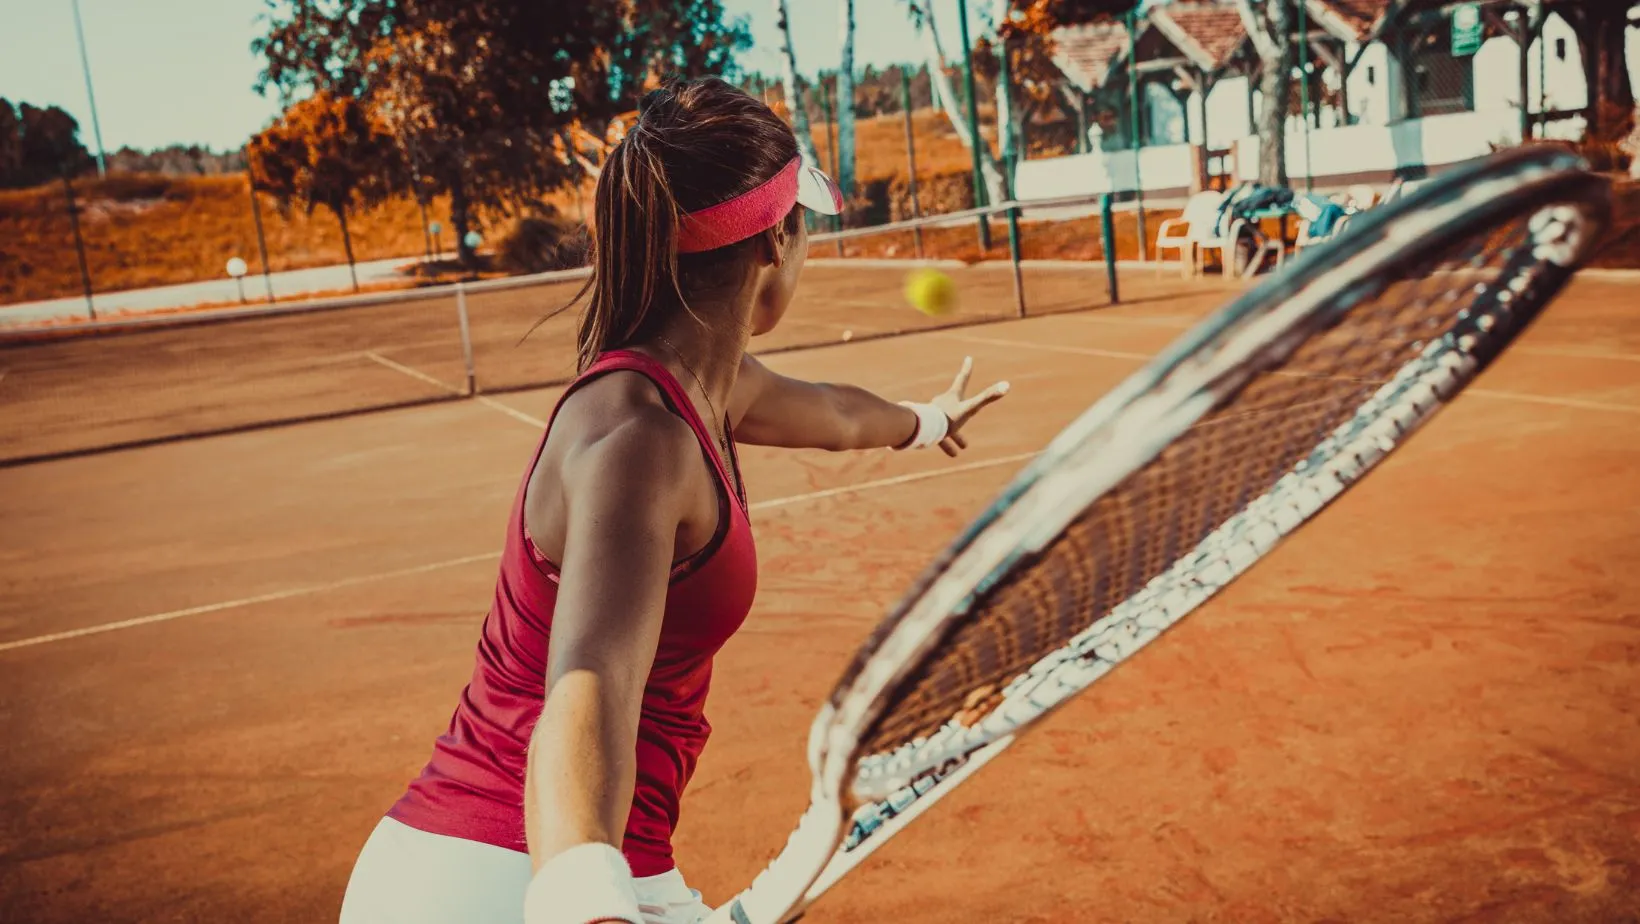 Did the Williams Sisters Play Juniors? Exploring Their Early Tennis Careers